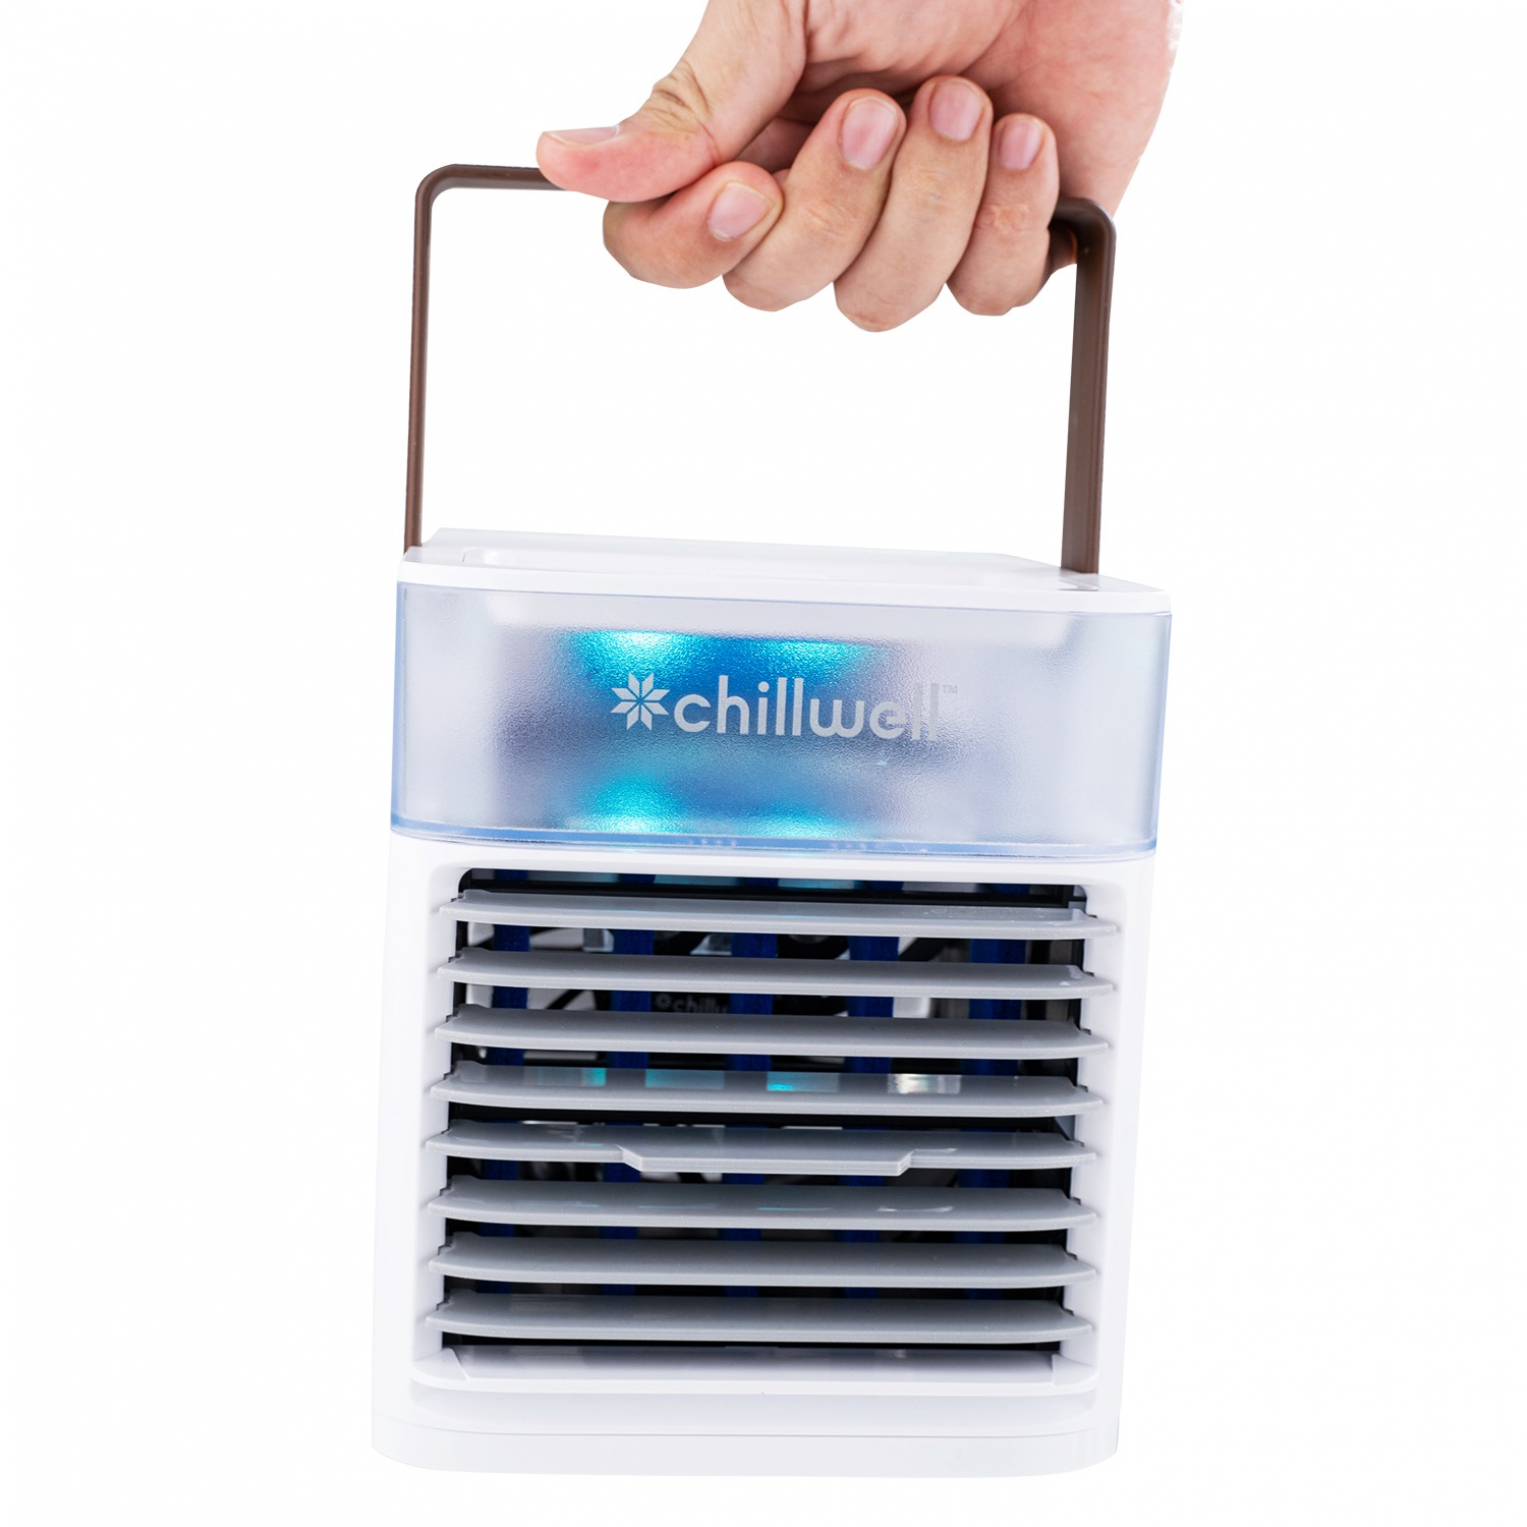 Chillwell Ac Chill Air Conditioner